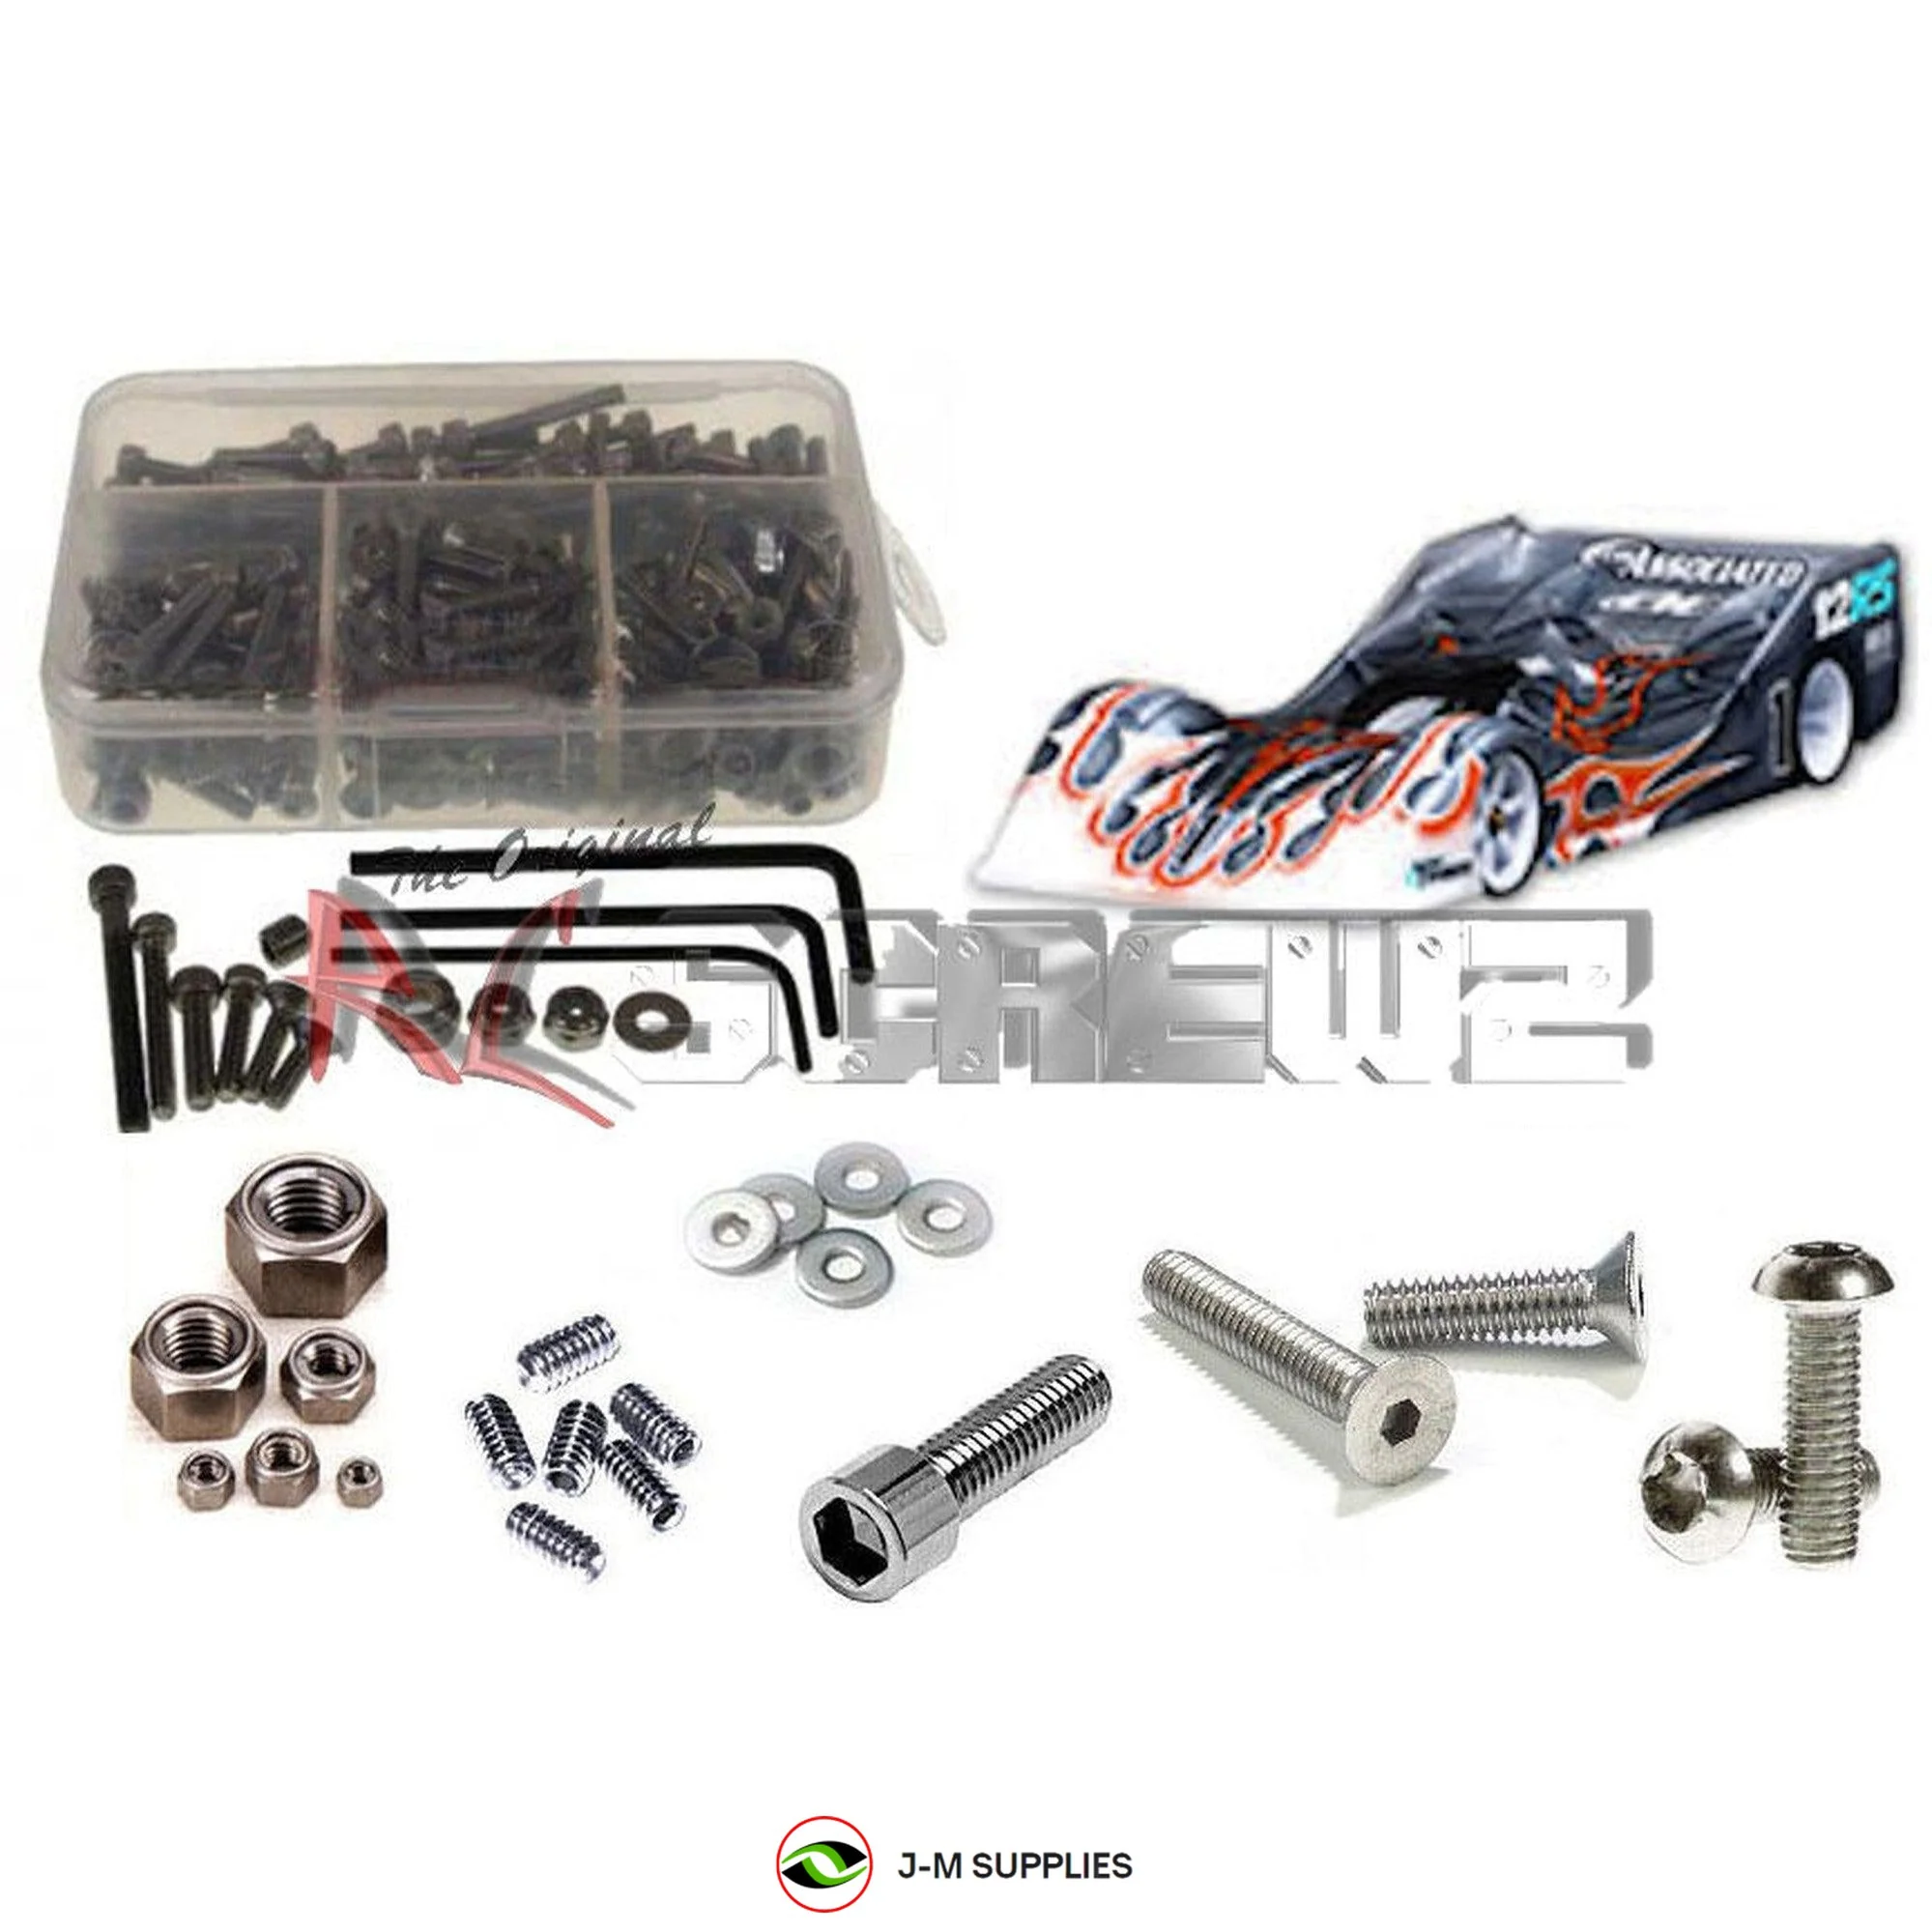 RCScrewZ Stainless Steel Screw Kit ass030 for Associated 12R5 1/12th Onroad - Picture 1 of 12